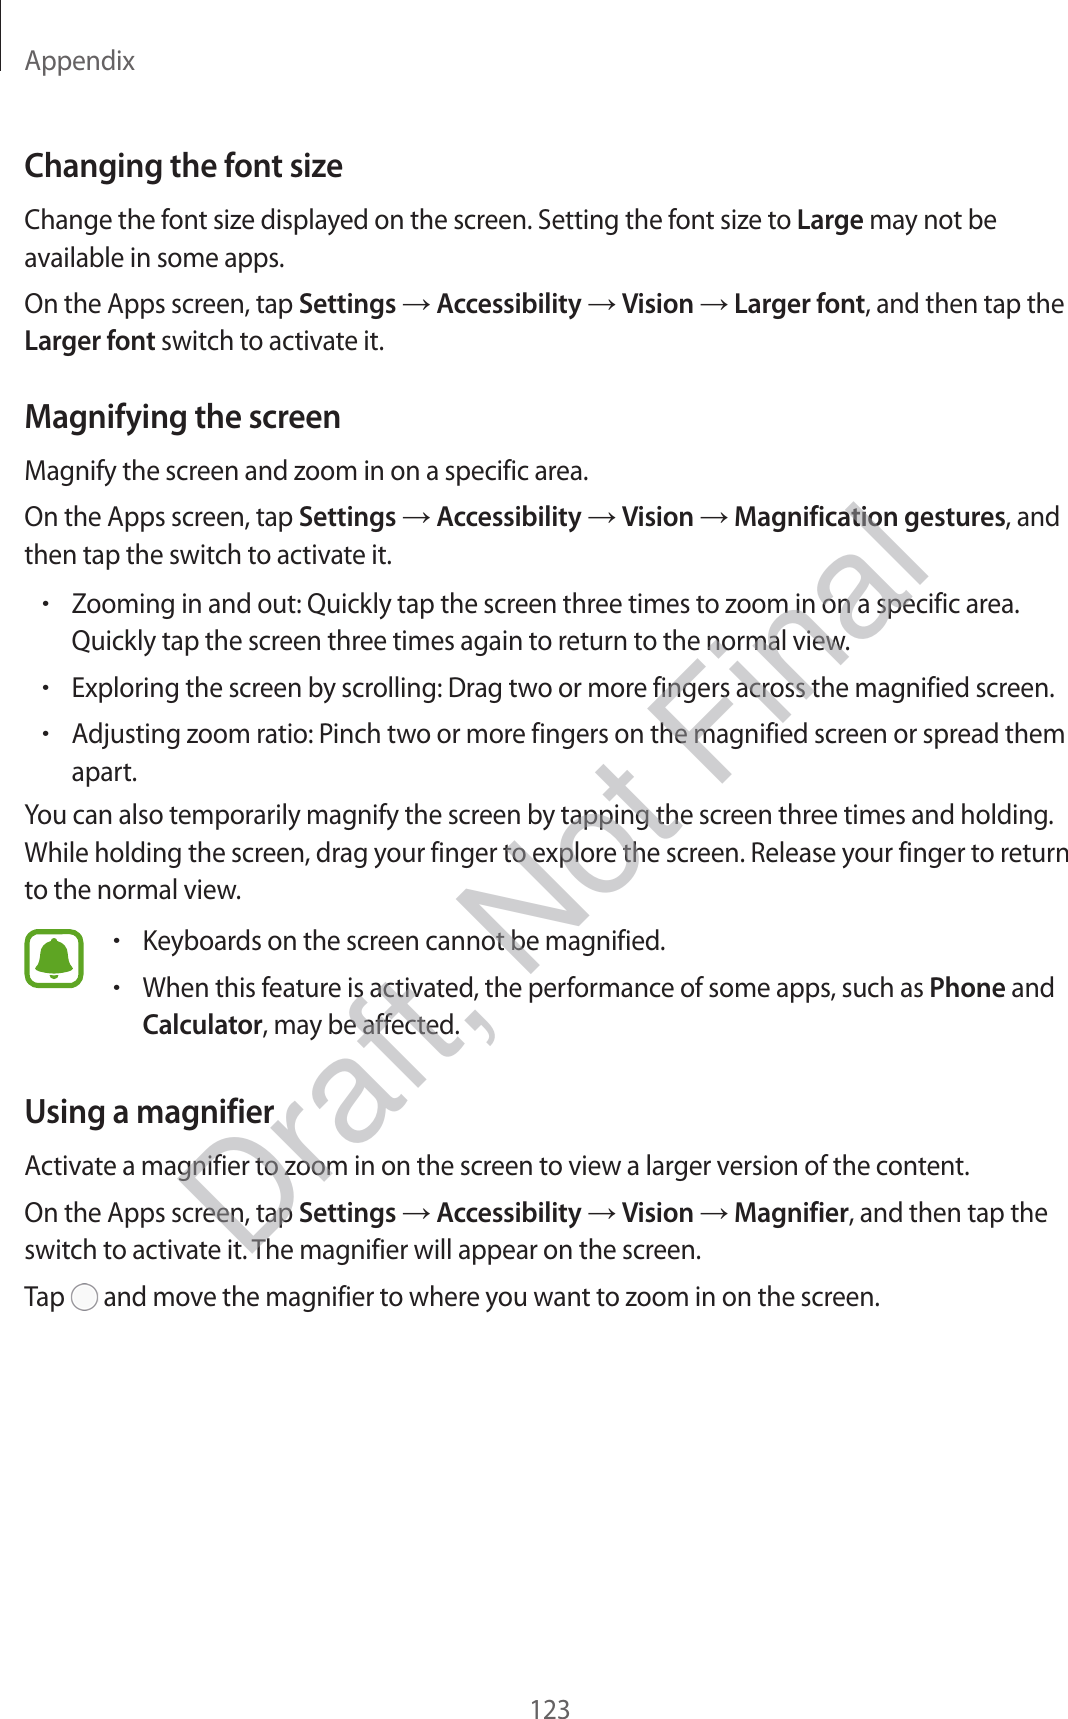 Appendix123Changing the font sizeChange the font size displayed on the screen. Setting the font size to Large may not be available in some apps.On the Apps screen, tap Settings  Accessibility  Vision  Larger font, and then tap the Larger font switch to activate it.Magnifying the screenMagnify the screen and zoom in on a specific area.On the Apps screen, tap Settings  Accessibility  Vision  Magnification gestures, and then tap the switch to activate it.•Zooming in and out: Quickly tap the screen three times to zoom in on a specific area. Quickly tap the screen three times again to return to the normal view.•Exploring the screen by scrolling: Drag two or more fingers across the magnified screen.•Adjusting zoom ratio: Pinch two or more fingers on the magnified screen or spread them apart.You can also temporarily magnify the screen by tapping the screen three times and holding. While holding the screen, drag your finger to explore the screen. Release your finger to return to the normal view.•Keyboards on the screen cannot be magnified.•When this feature is activated, the performance of some apps, such as Phone and Calculator, may be affected.Using a magnifierActivate a magnifier to zoom in on the screen to view a larger version of the content.On the Apps screen, tap Settings  Accessibility  Vision  Magnifier, and then tap the switch to activate it. The magnifier will appear on the screen.Tap   and move the magnifier to where you want to zoom in on the screen.Draft, Not Final